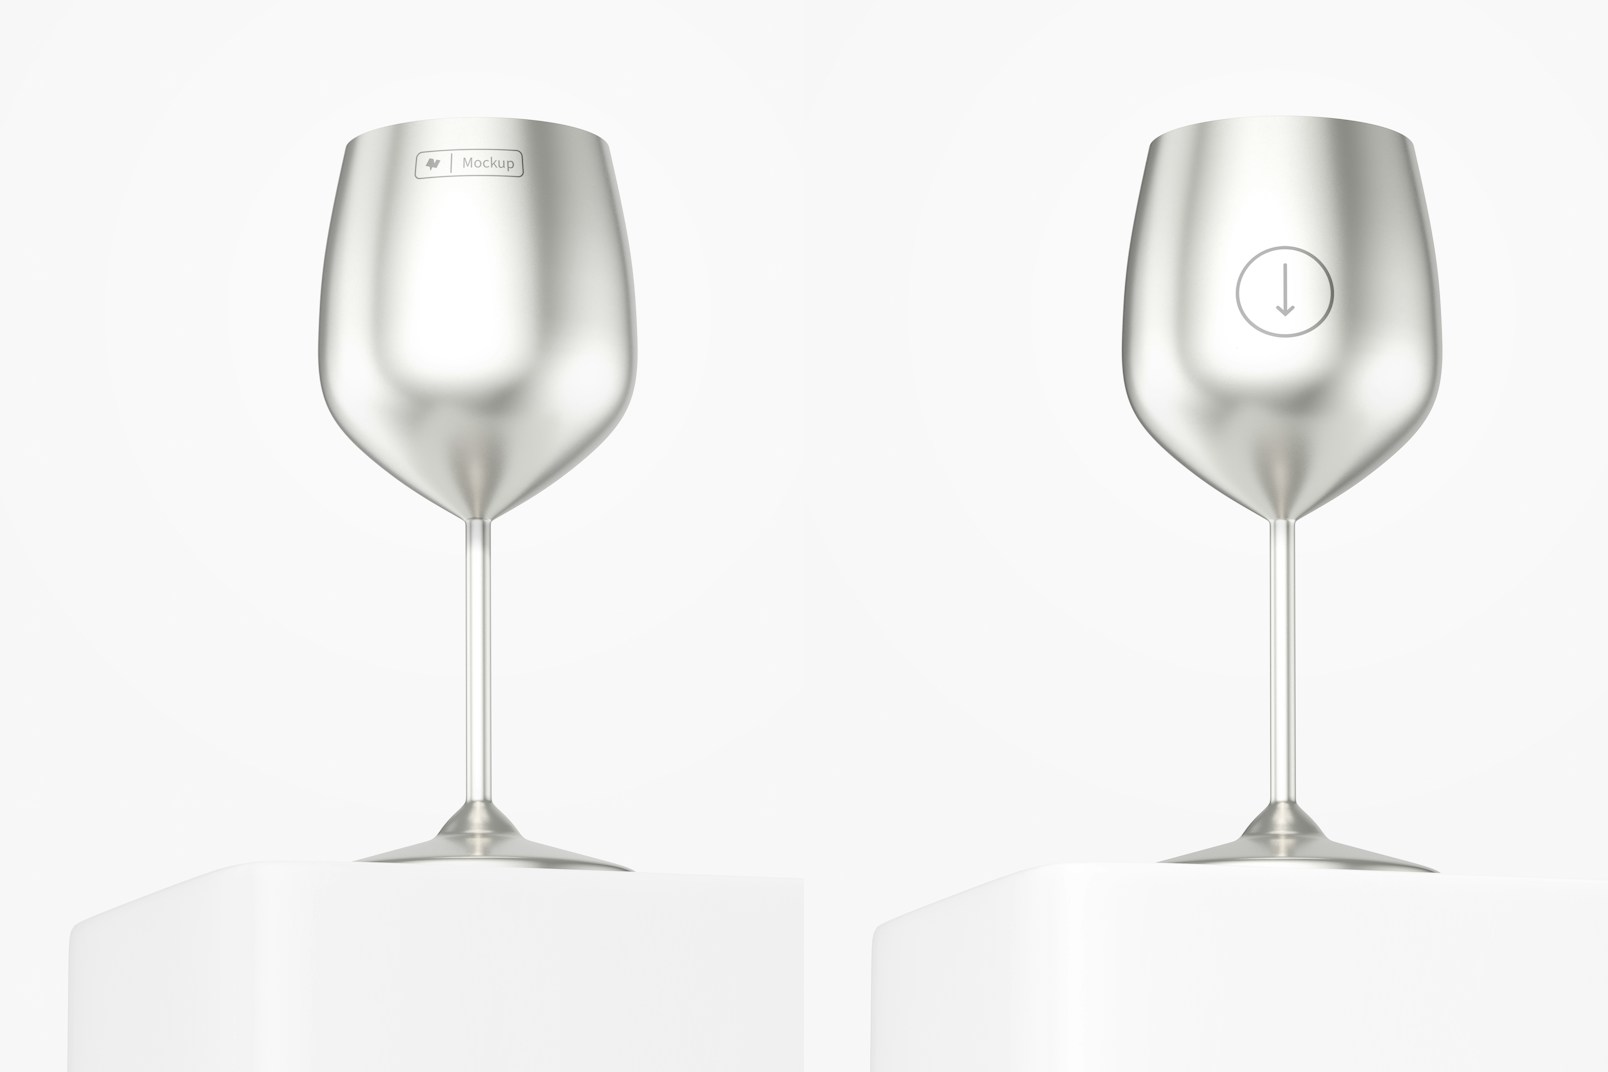 Stainless Steel Wine Glass Mockup, Low Angle View